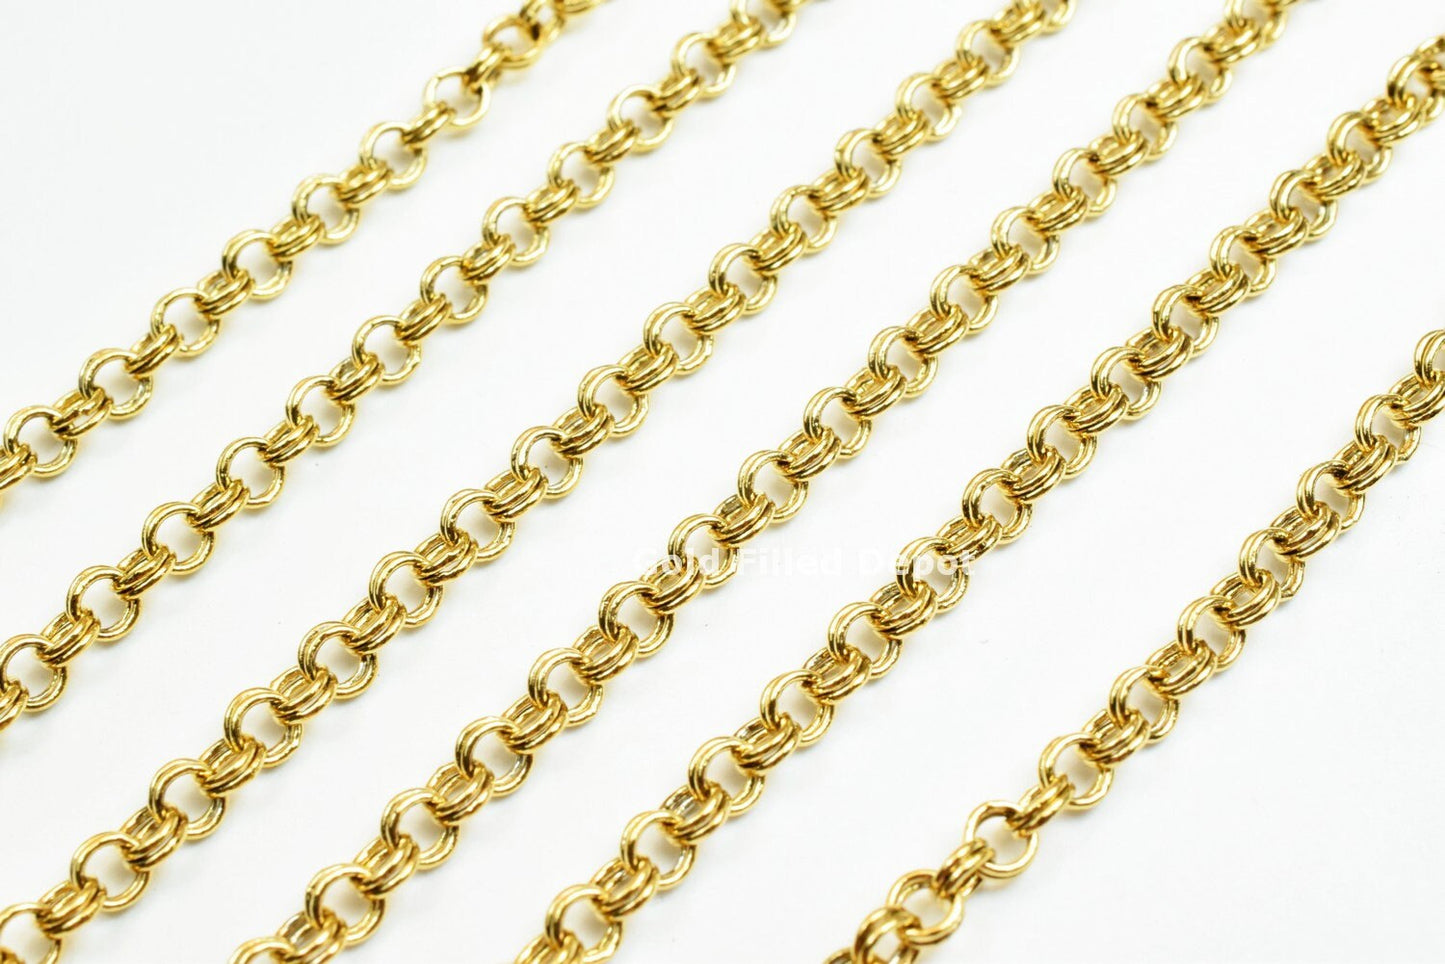 18K Gold Filled Double Rolo Cable Link Chain  personalize necklace Width 3mm Thickness 1mm findings for Jewelry supplies wholesale-3 Feet